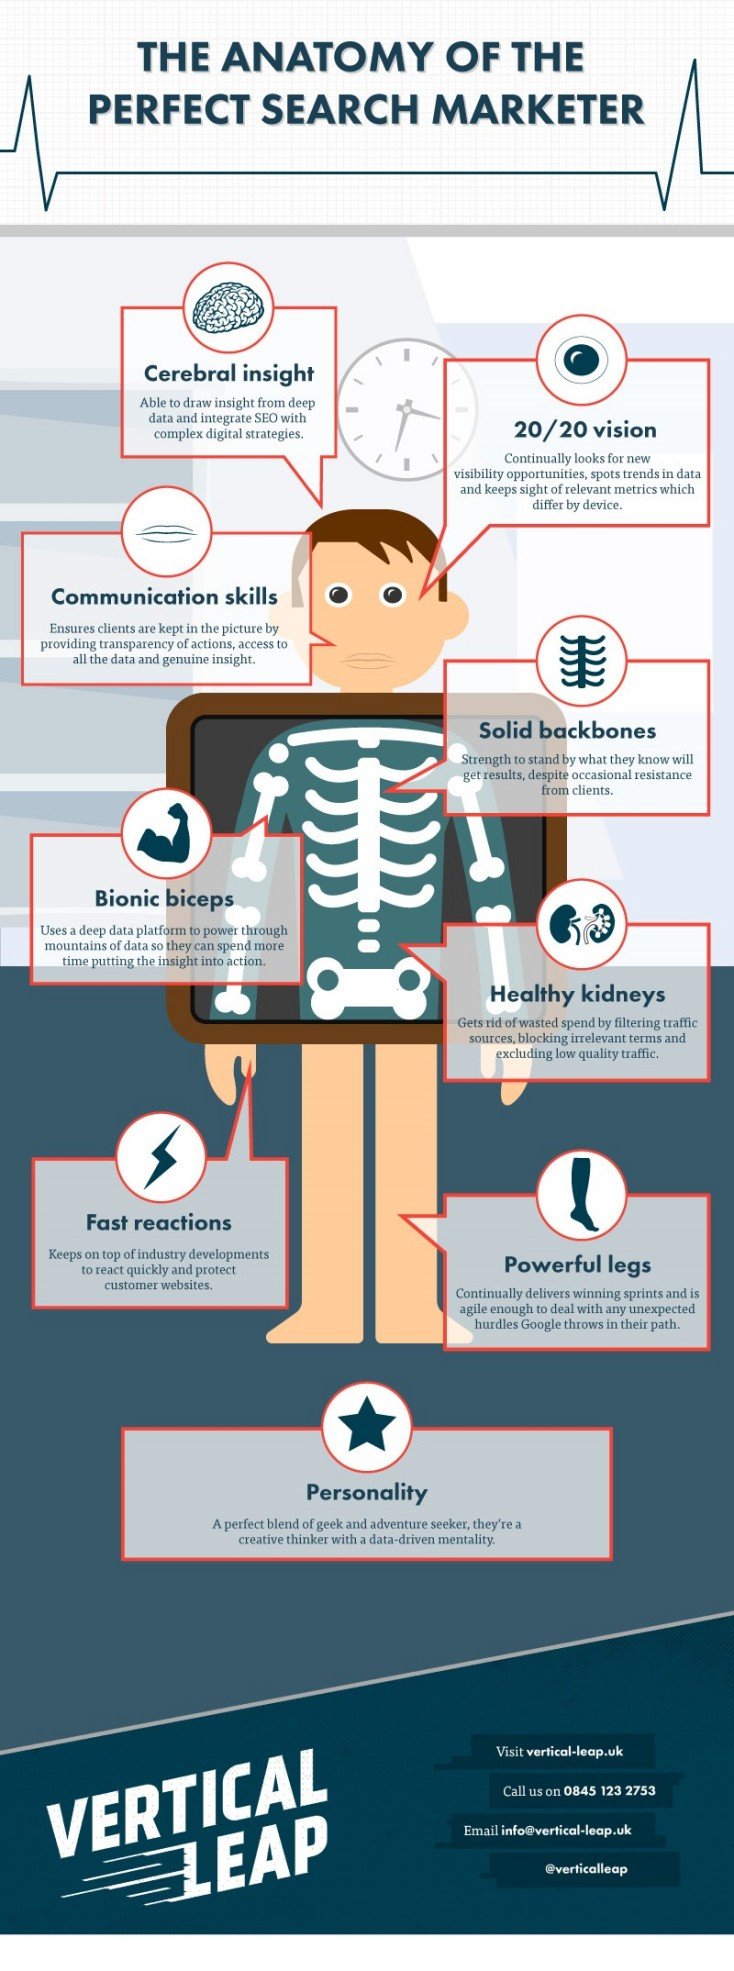 Anatomy of the perfect search marketer